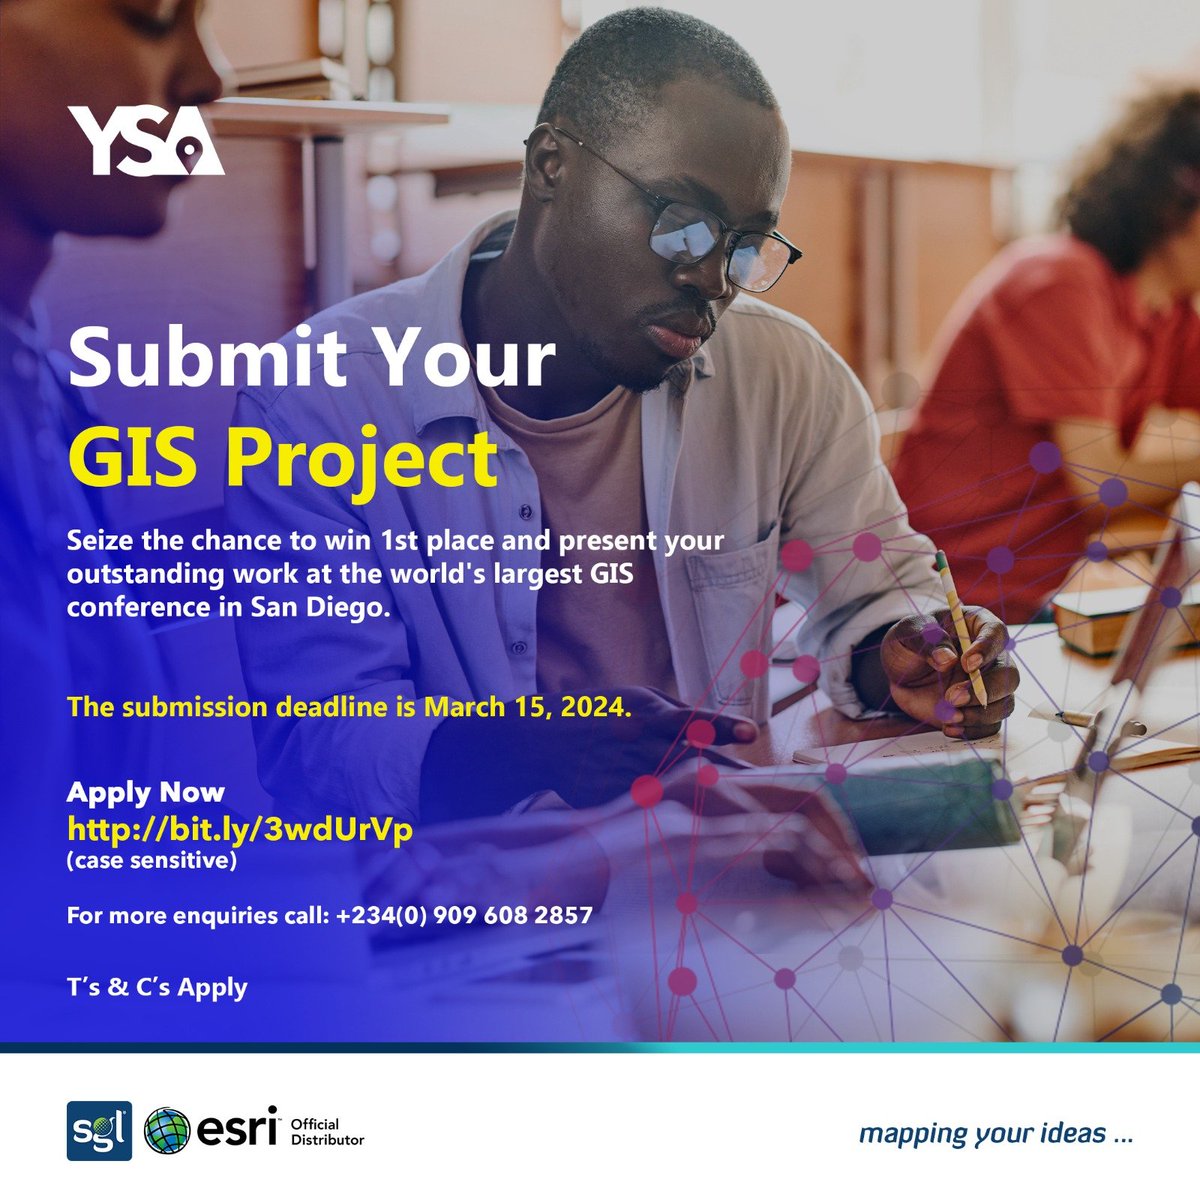 WE ARE STILL ACCEPTING ENTRIES UNTIL MARCH 15 2024! Submit your GIS project and stand a chance to showcase it to the world. Apply here: bit.ly/3wdUrVp #youngscholaraward #ysa #gis #geospatialtechnology #project #competition #students #Nigeria